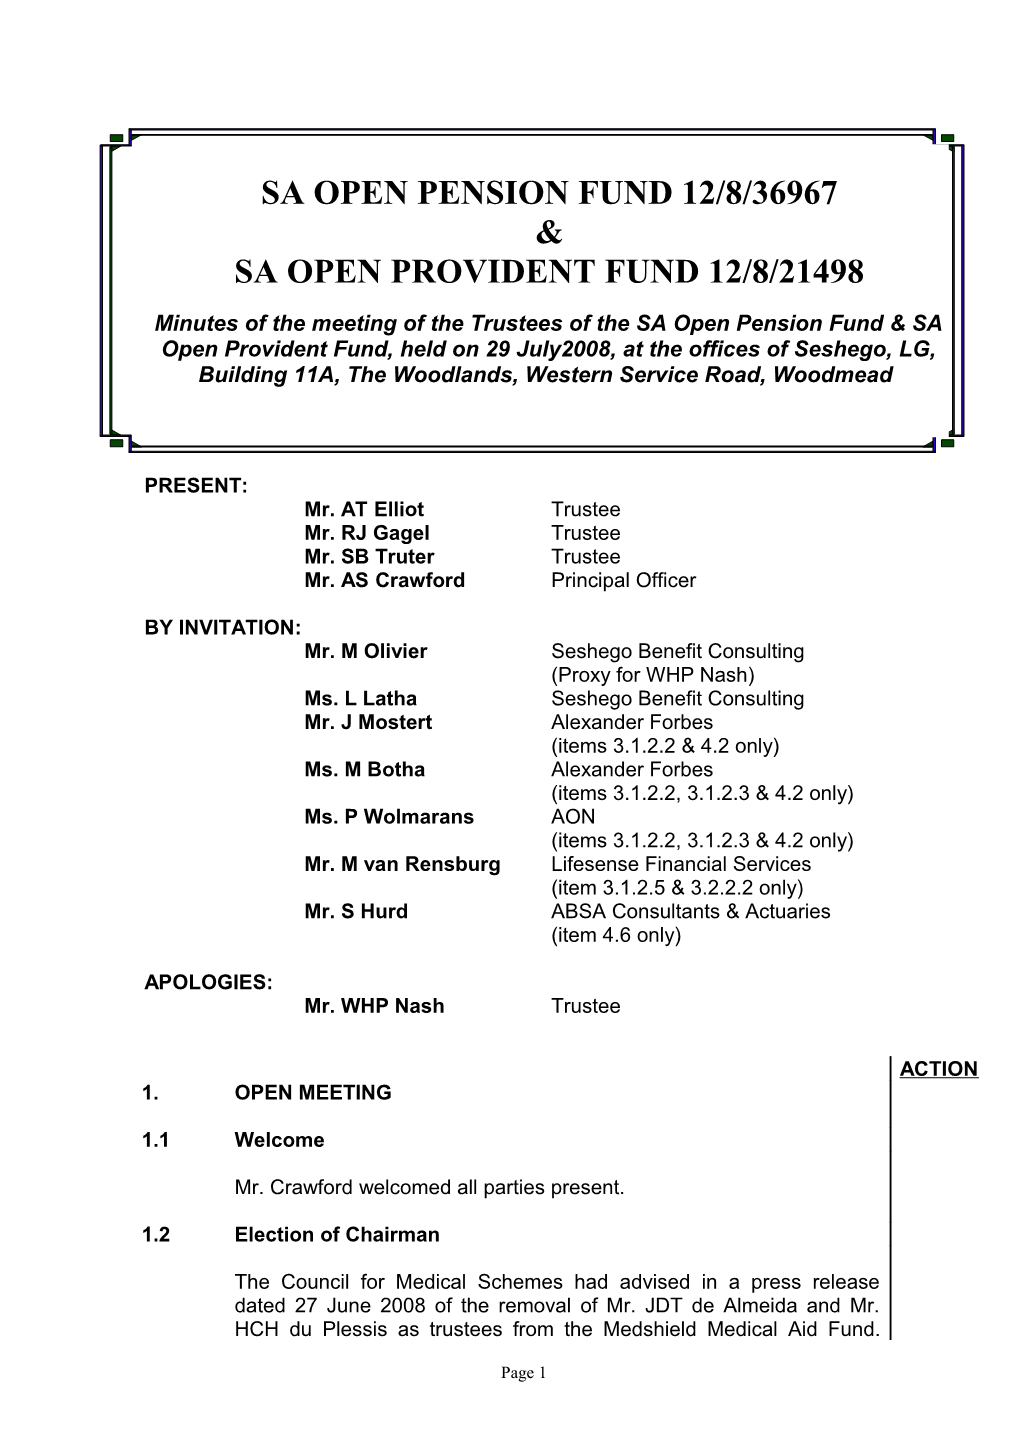 SA Open Pension Fund & SA Open Provident Fund 29 July 2008 14 March 2008